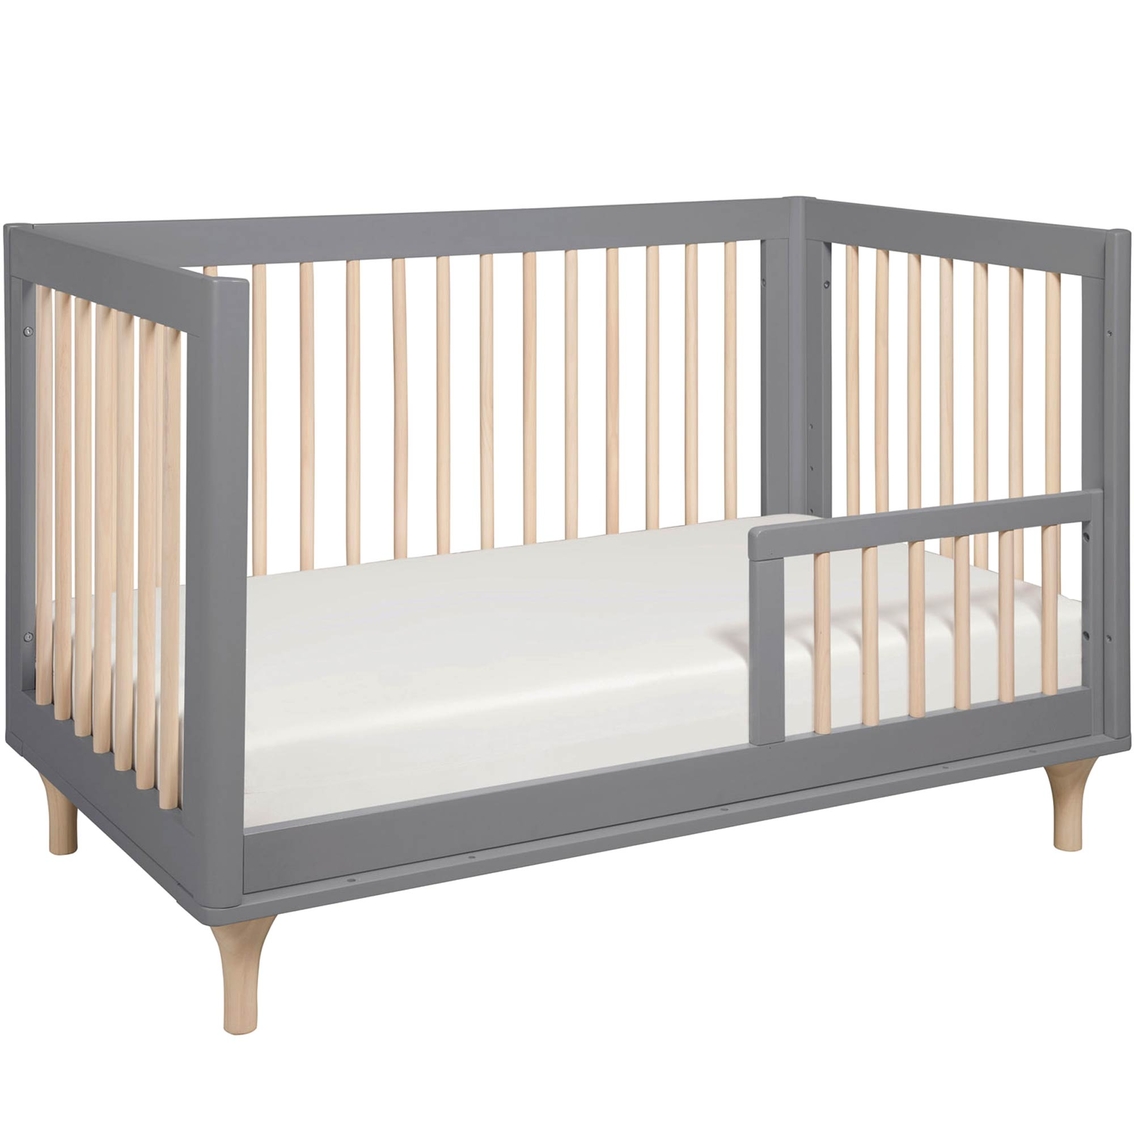 Babyletto Lolly 3 in 1 Convertible Crib - Image 2 of 4